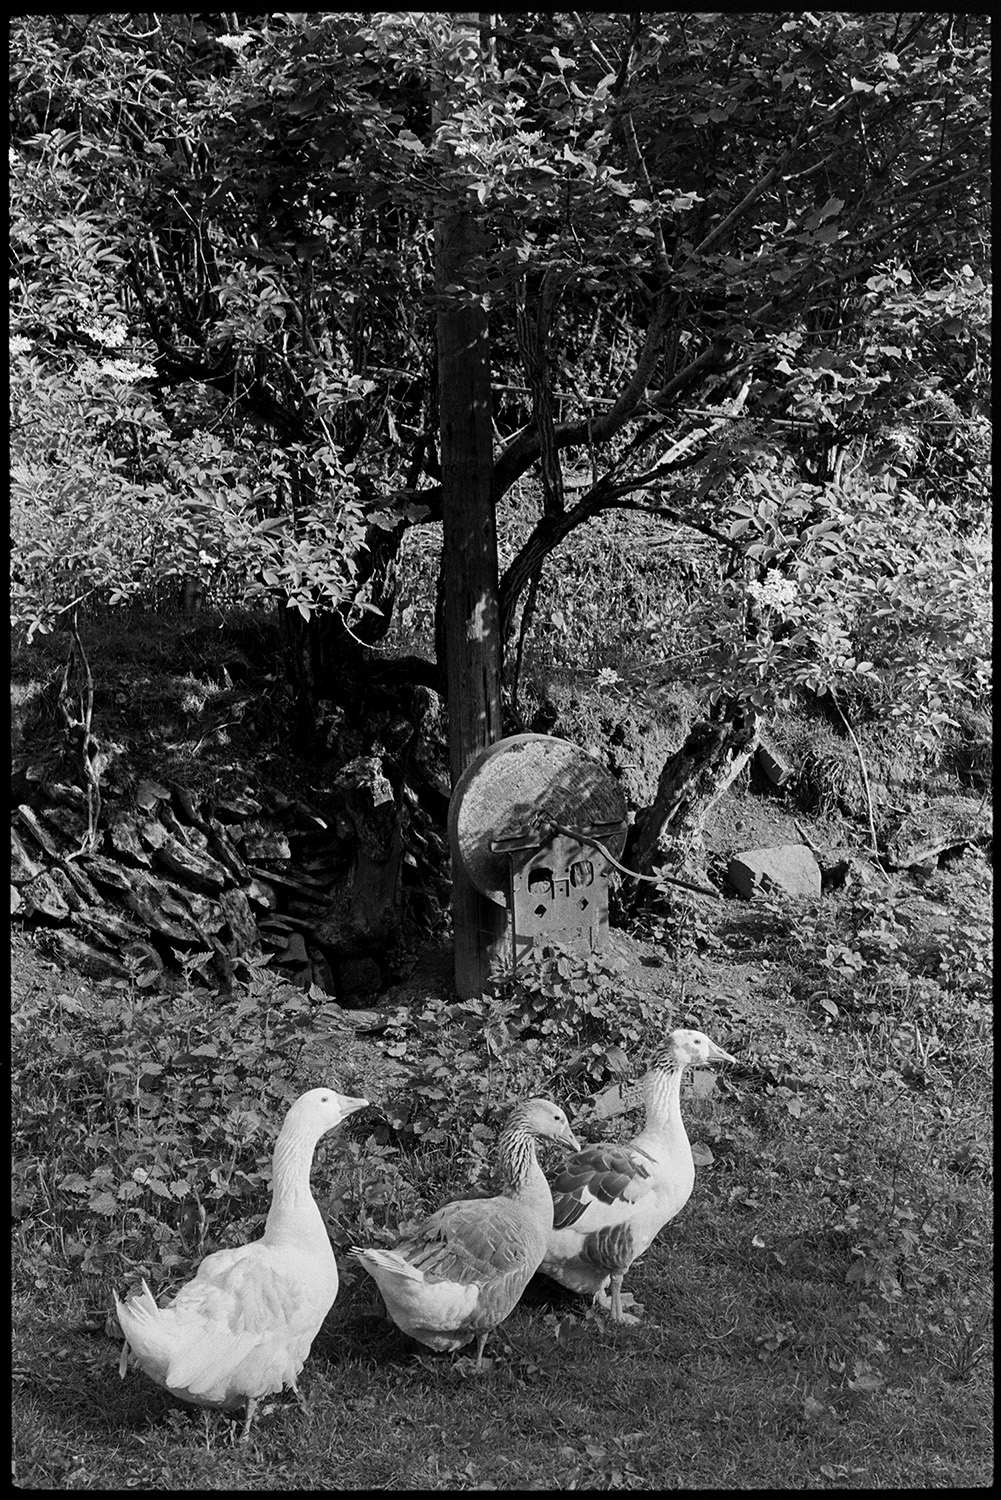 Old grindstone under hedge with geese. 
[Three geese walking past a grindstone, which used to belong to Archie Parkhouse, under a trees in a field at Millhams, Dolton.]